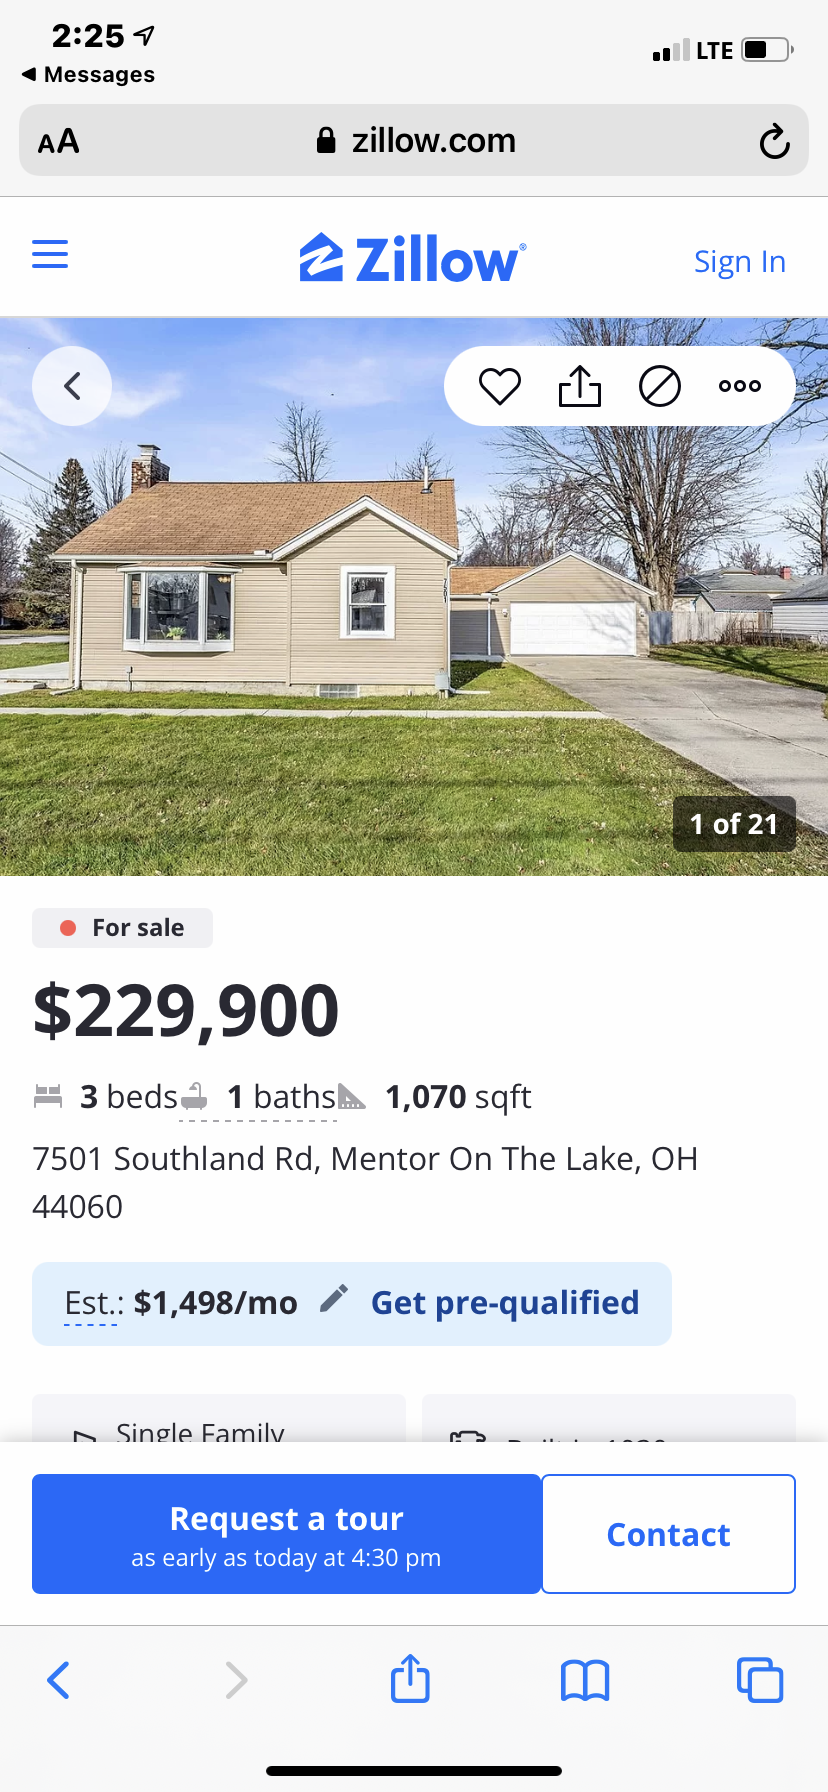 Home for Sale for $229900 in Mentor, OH | For Sale & Free — Nextdoor